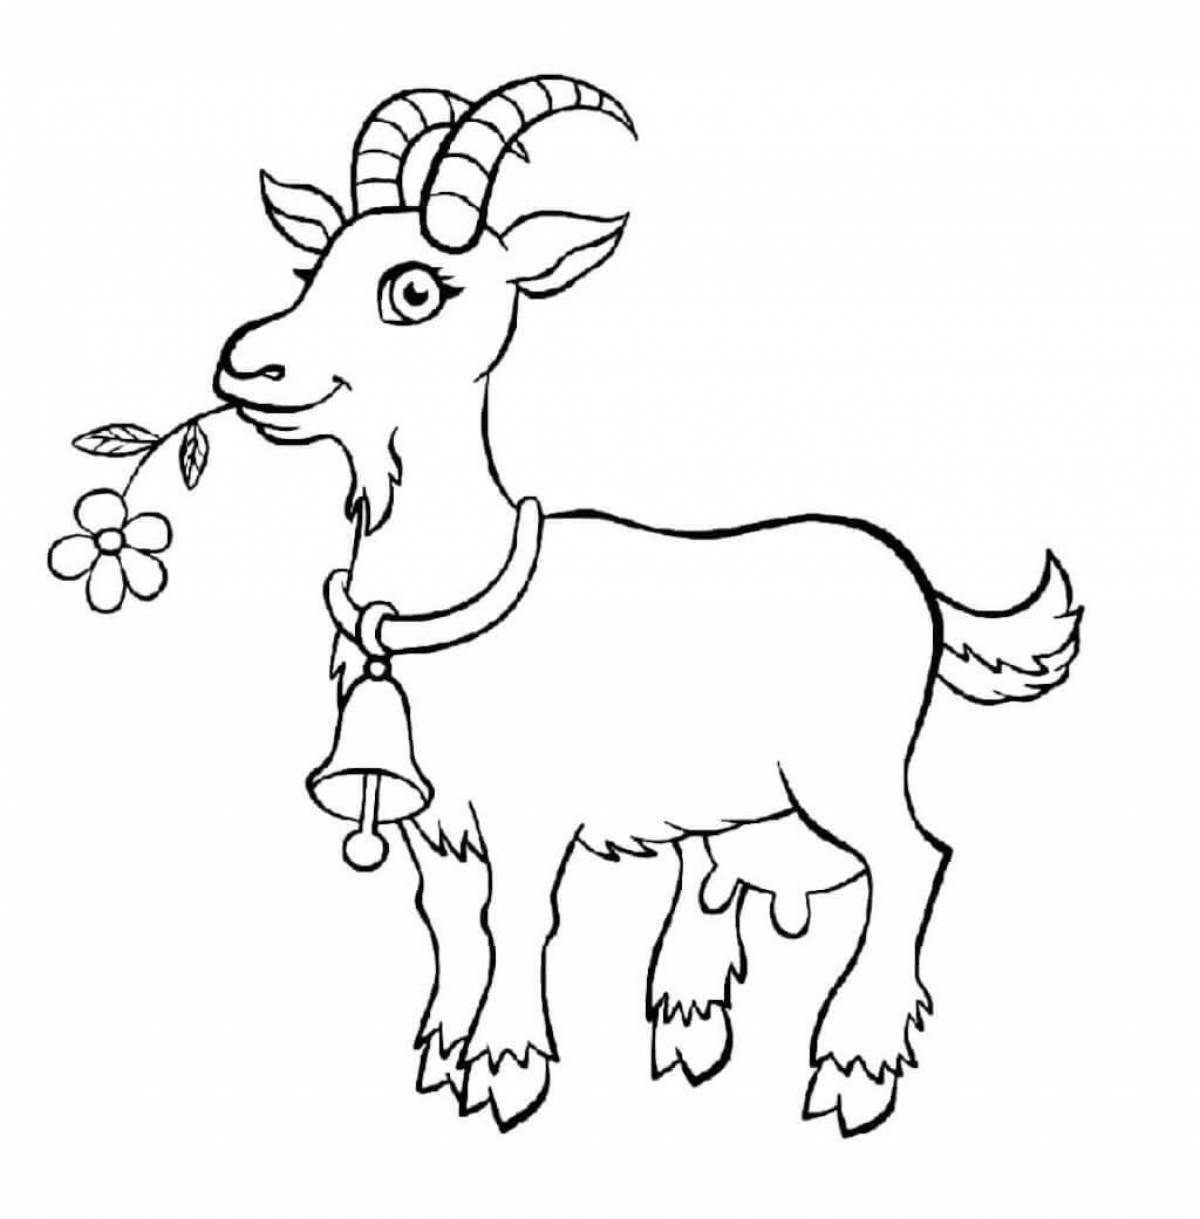 Humorous goat coloring book for kids